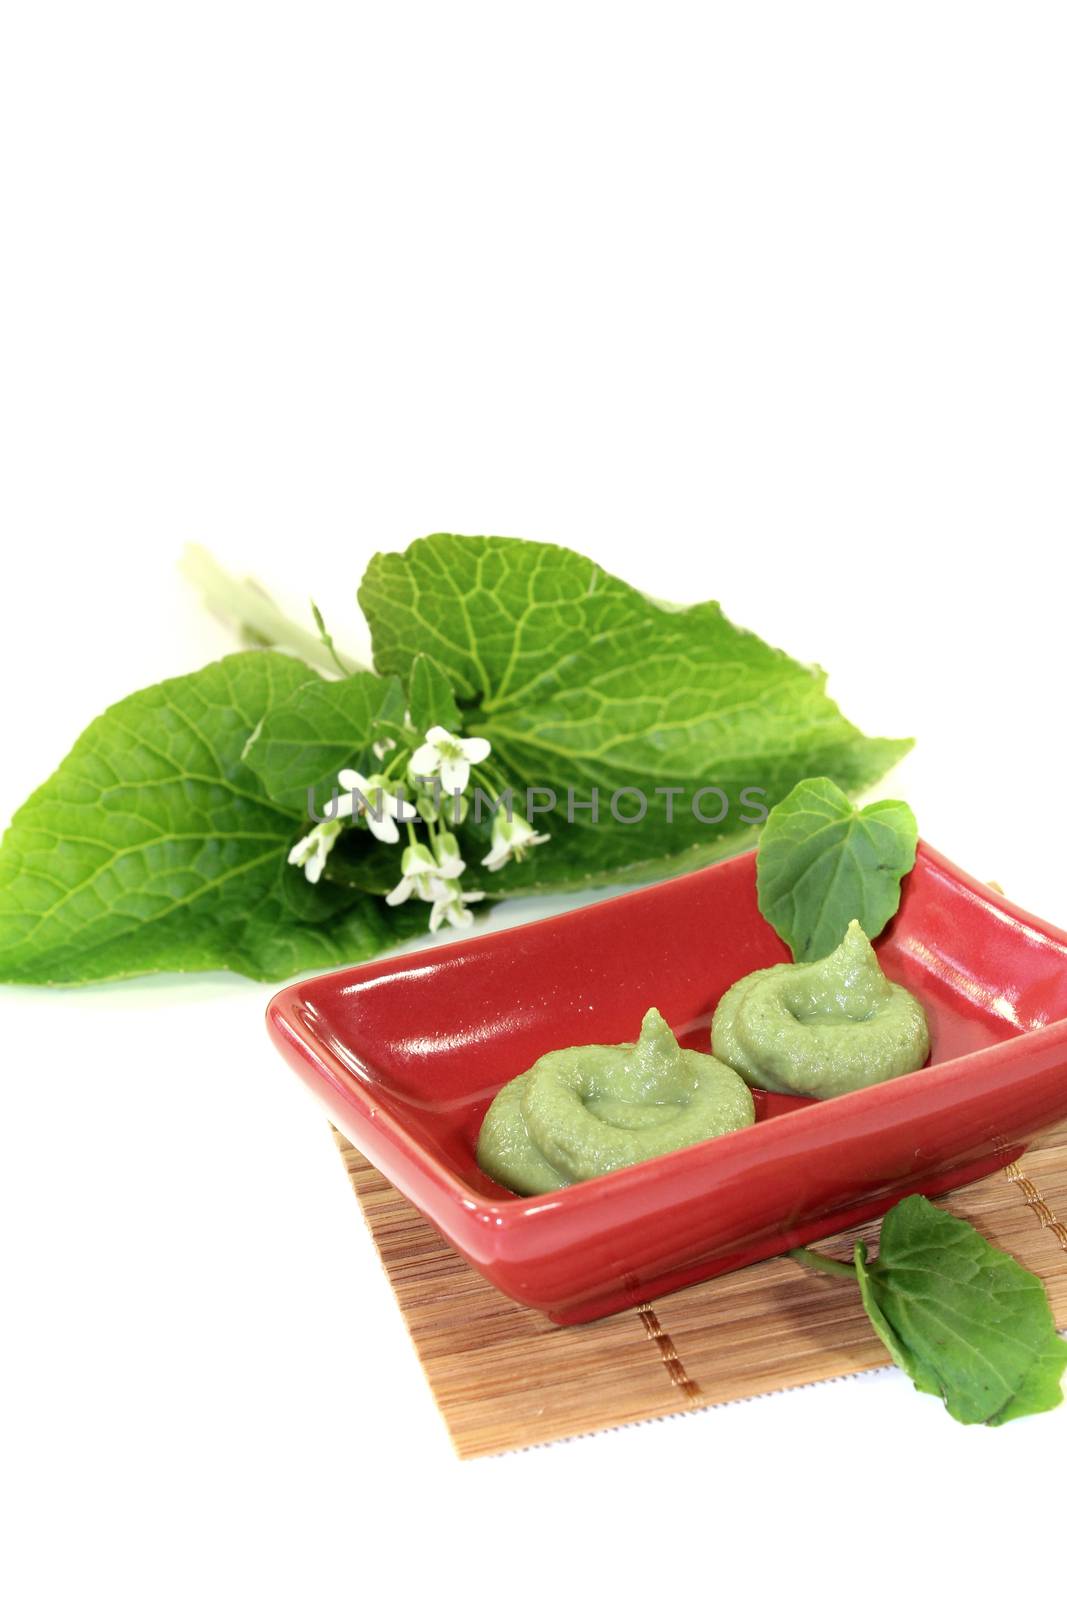 fresh spicy Wasabi with leaf and flower in a red bowl